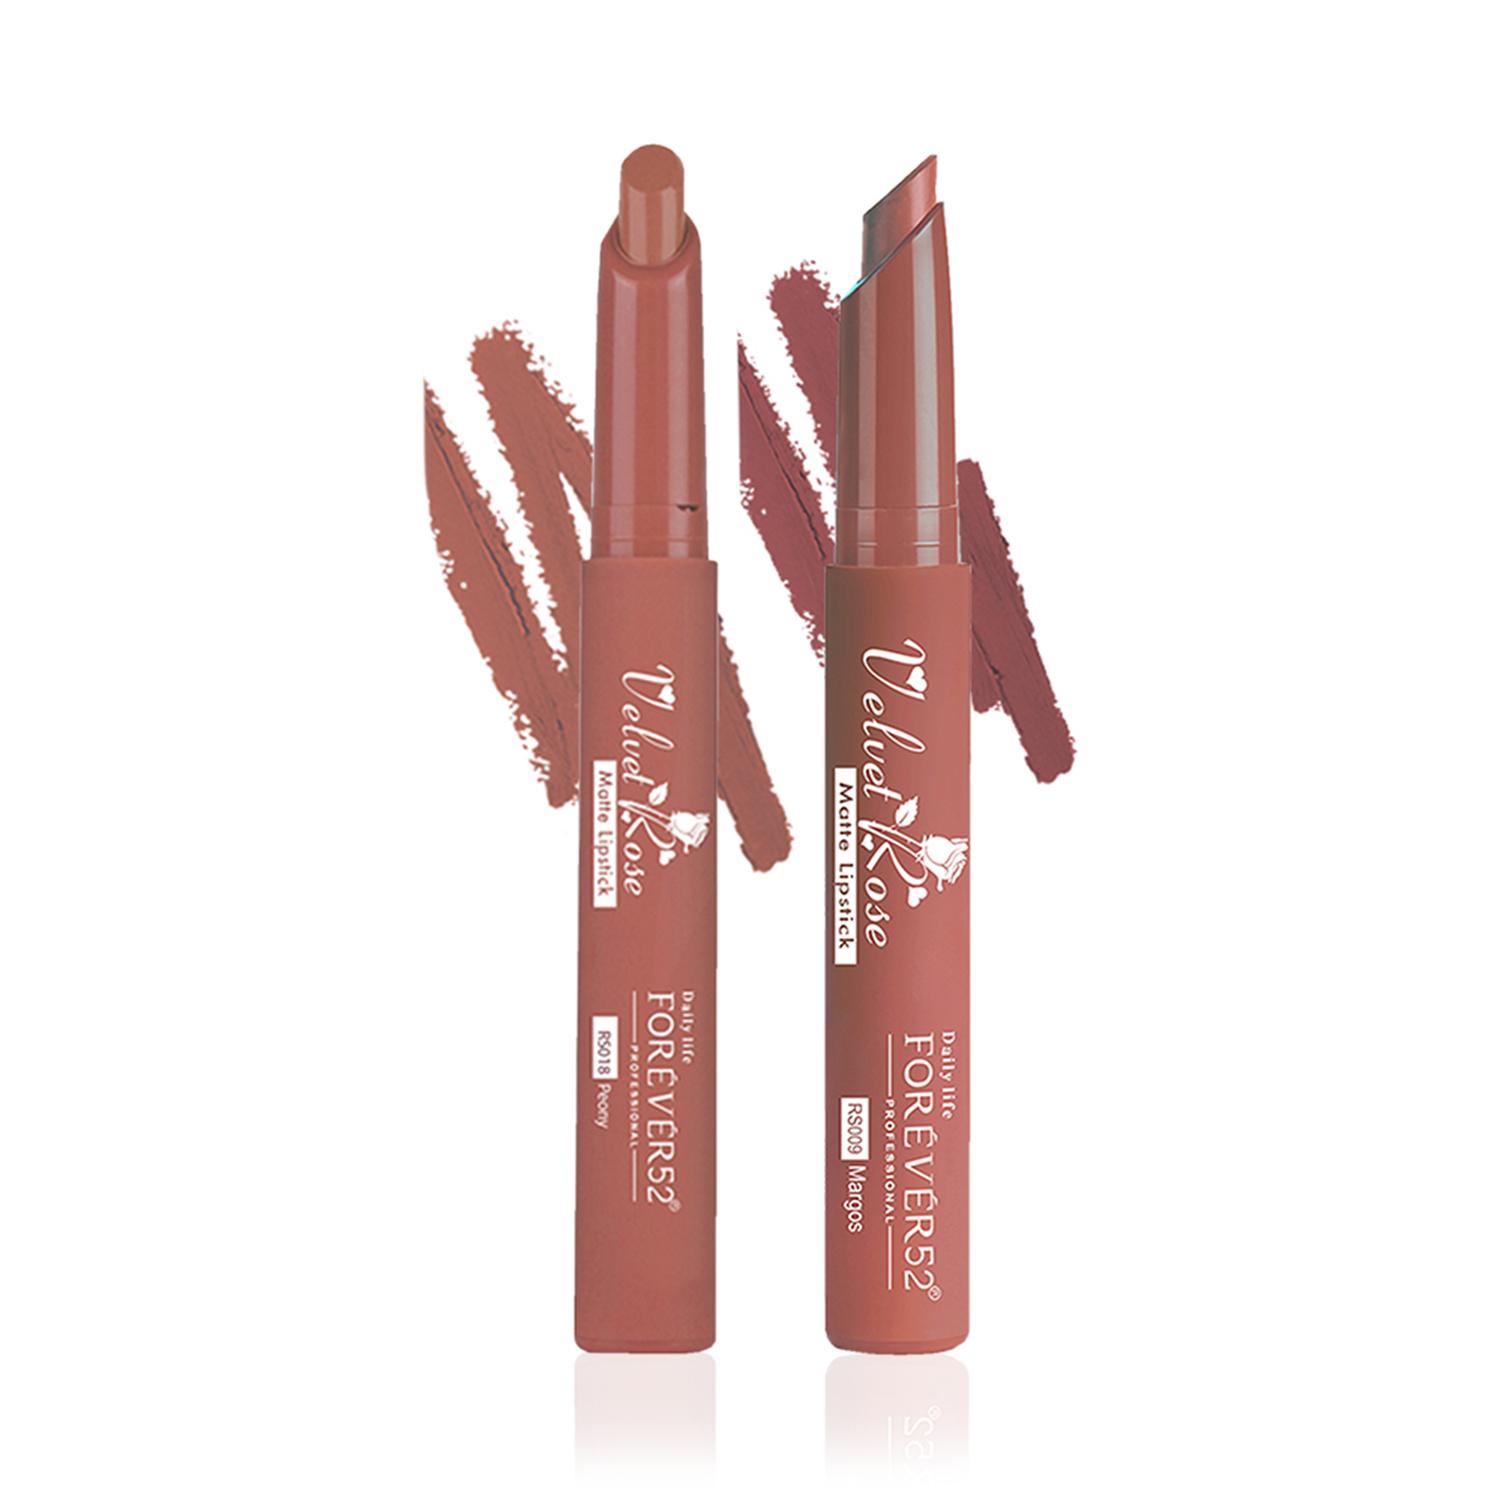 Daily Life Forever52 | Daily Life Forever52 Velvet Rose Matte Lipstick Set of 2 Crayons Combo (Margos,Peony)